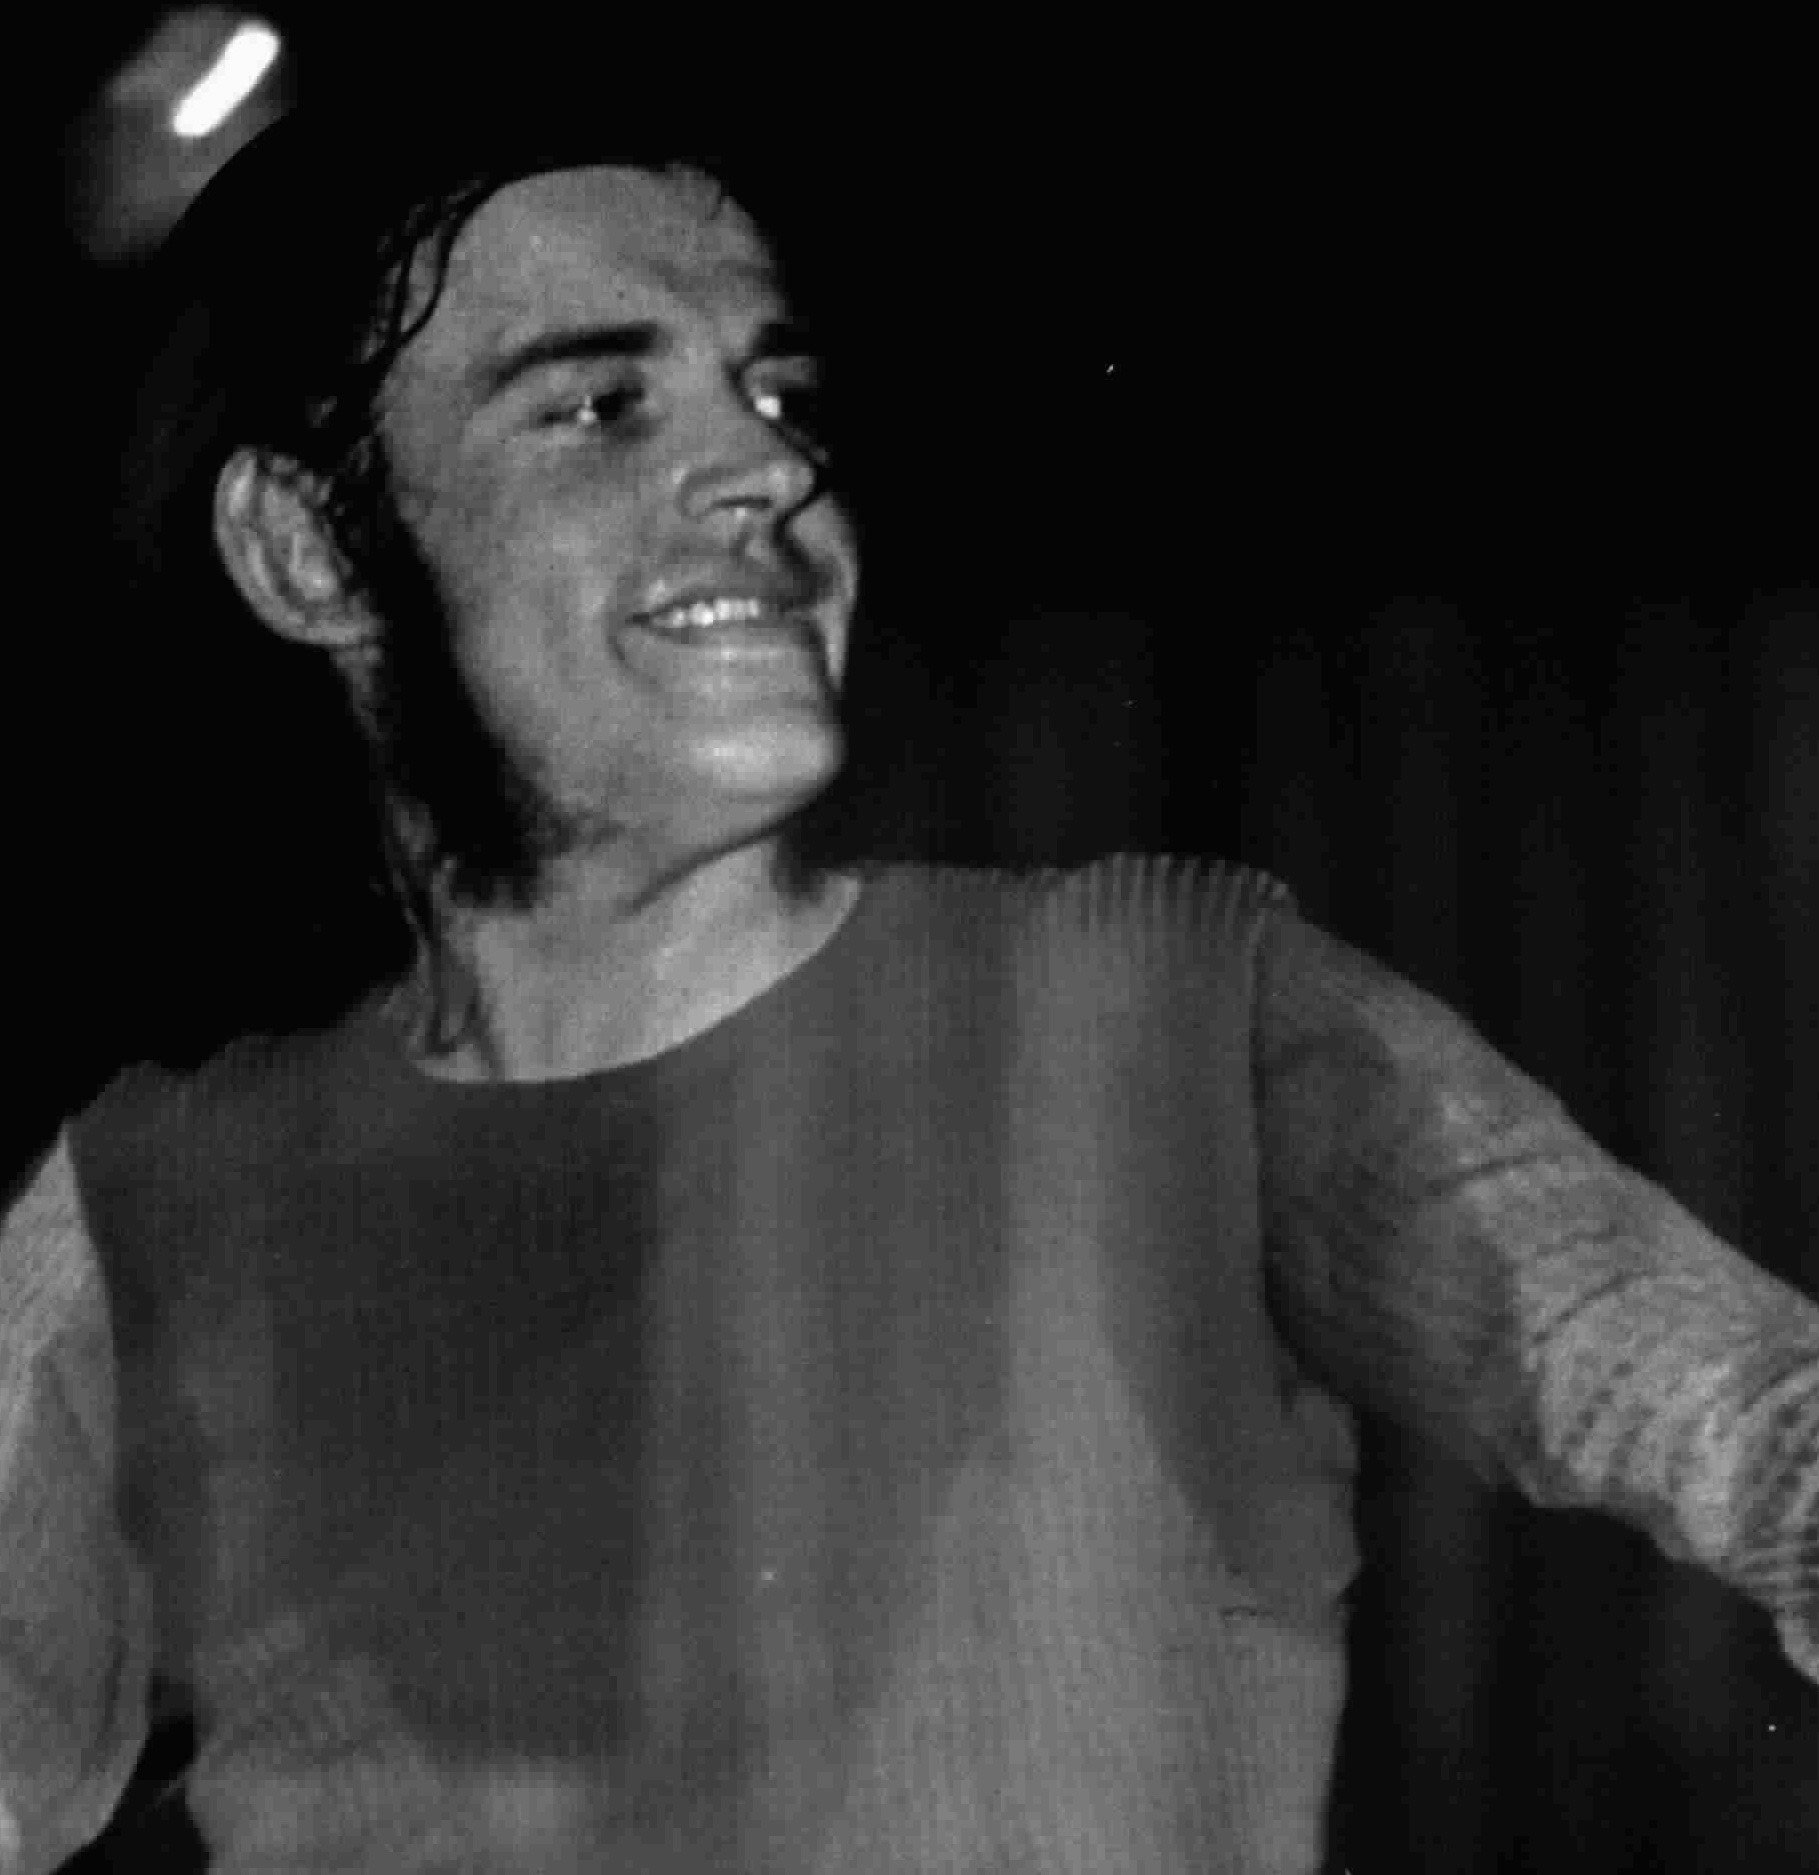 Cocker in concert at Palasport, Rome, July 1972